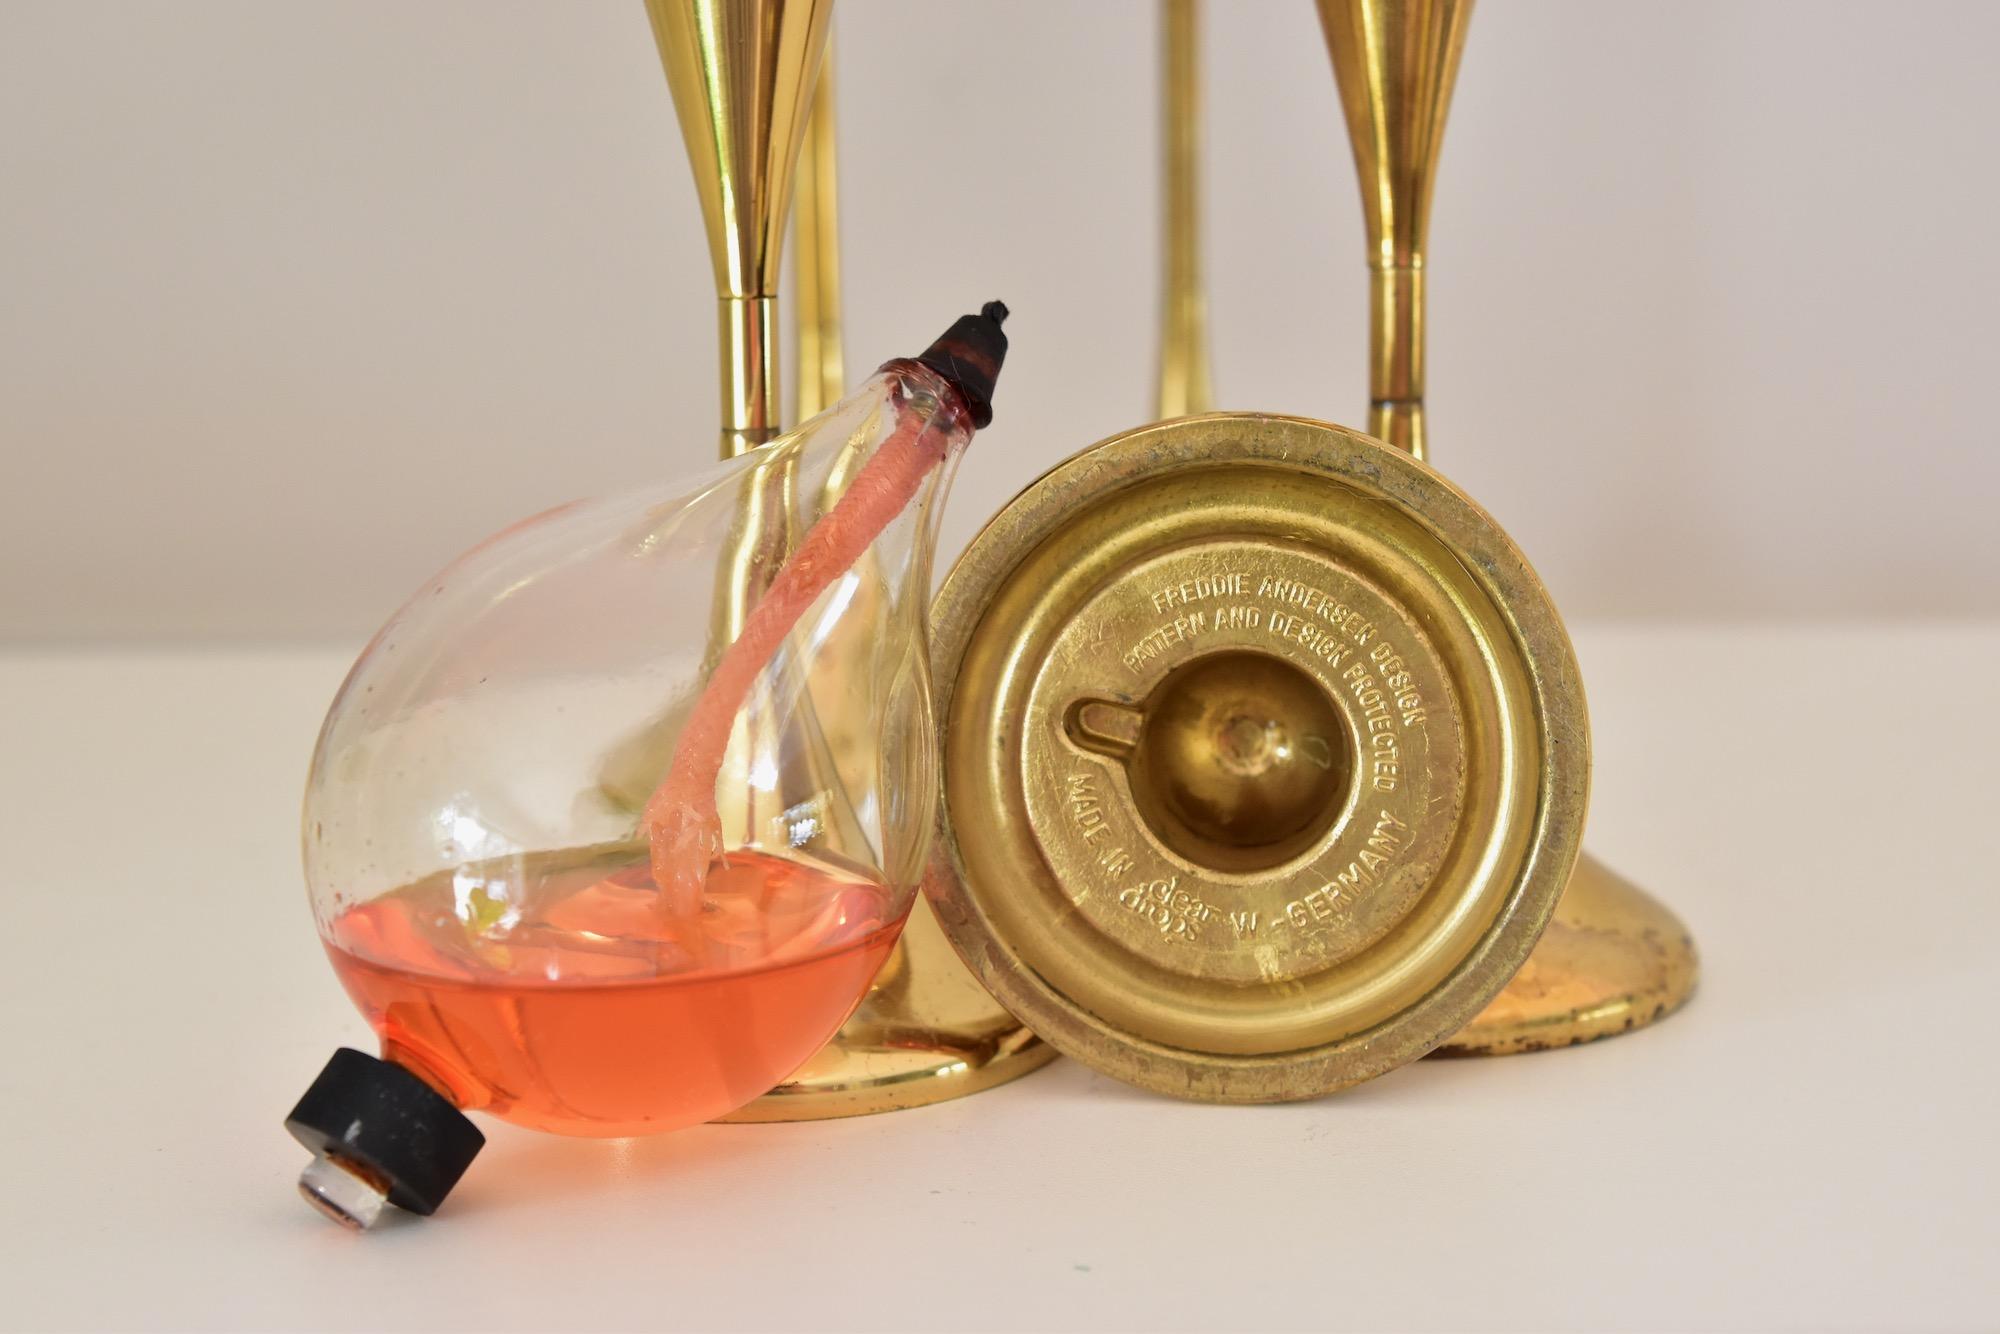 Five beautiful clear drops modernist brass oil lamps designed by Freddie Andersen, made in Western Germany in the 1970s. In good condition. Price for the set.
Looks beautiful with colored lamp oil. Glass cleaned and with new oil lamp